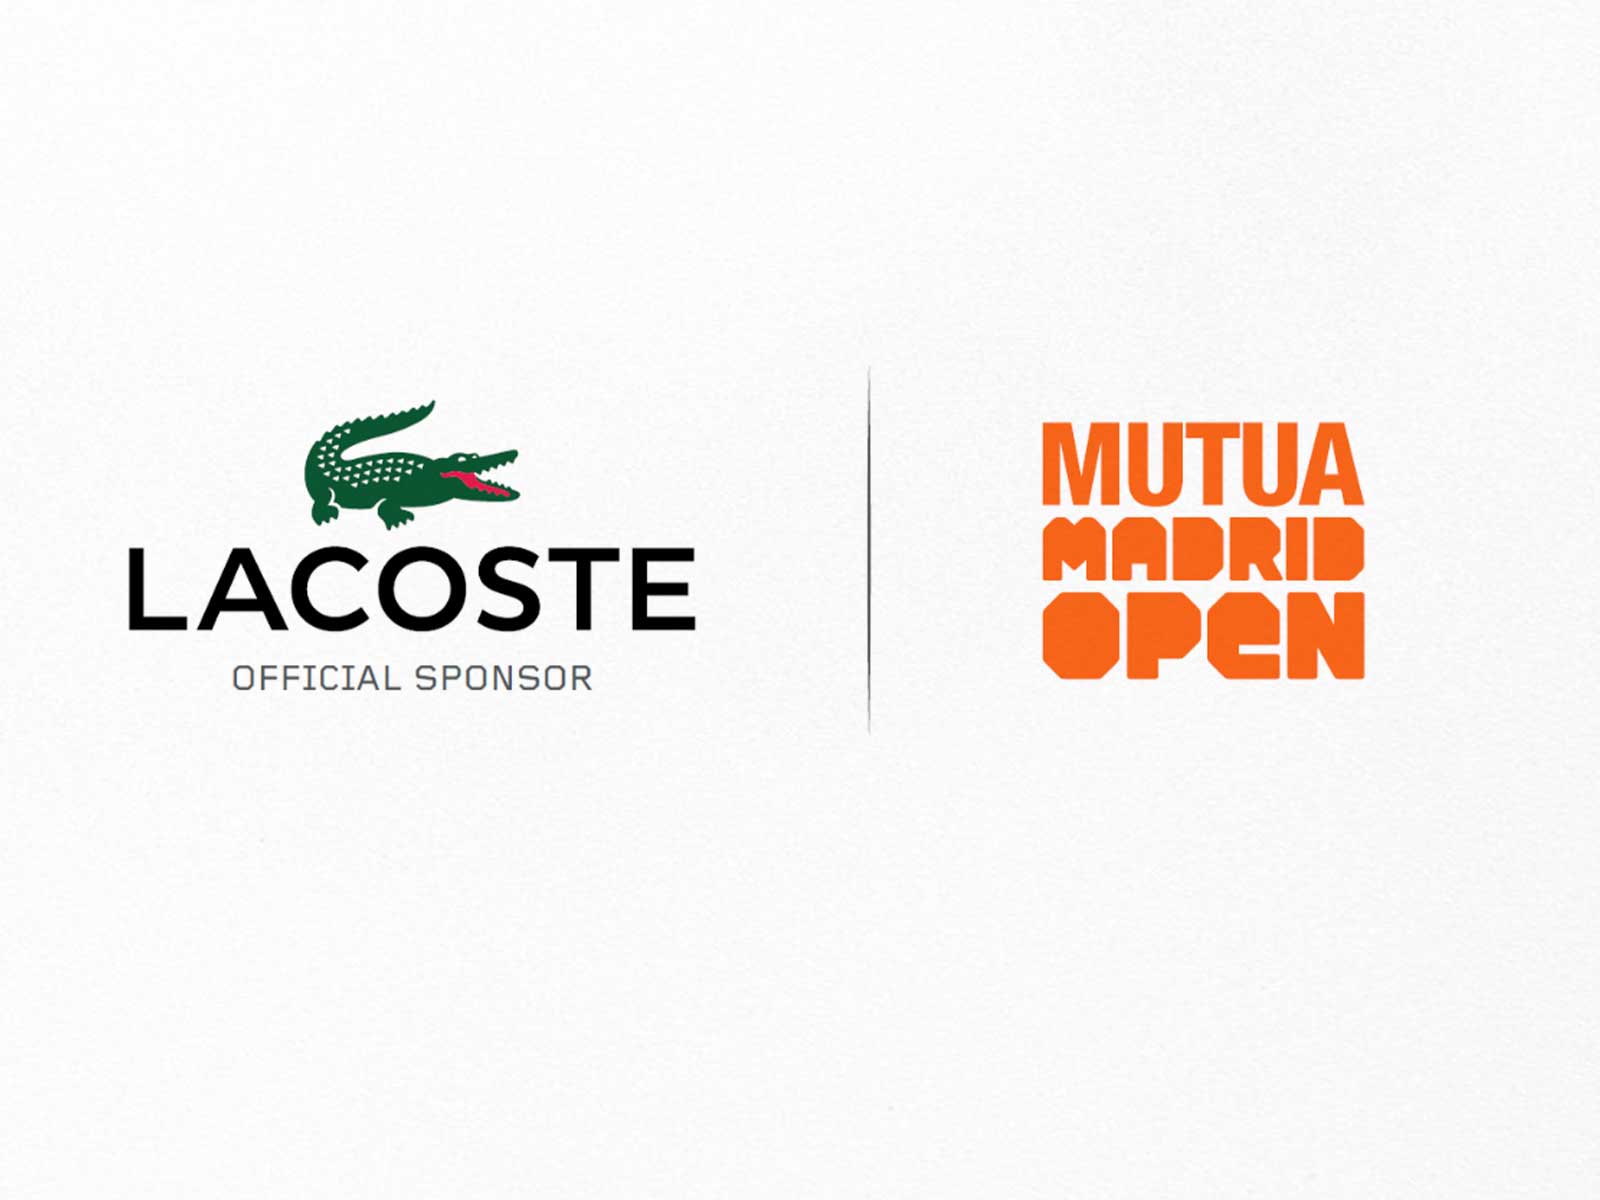 Lacoste, official partner of the Mutua Madrid Open